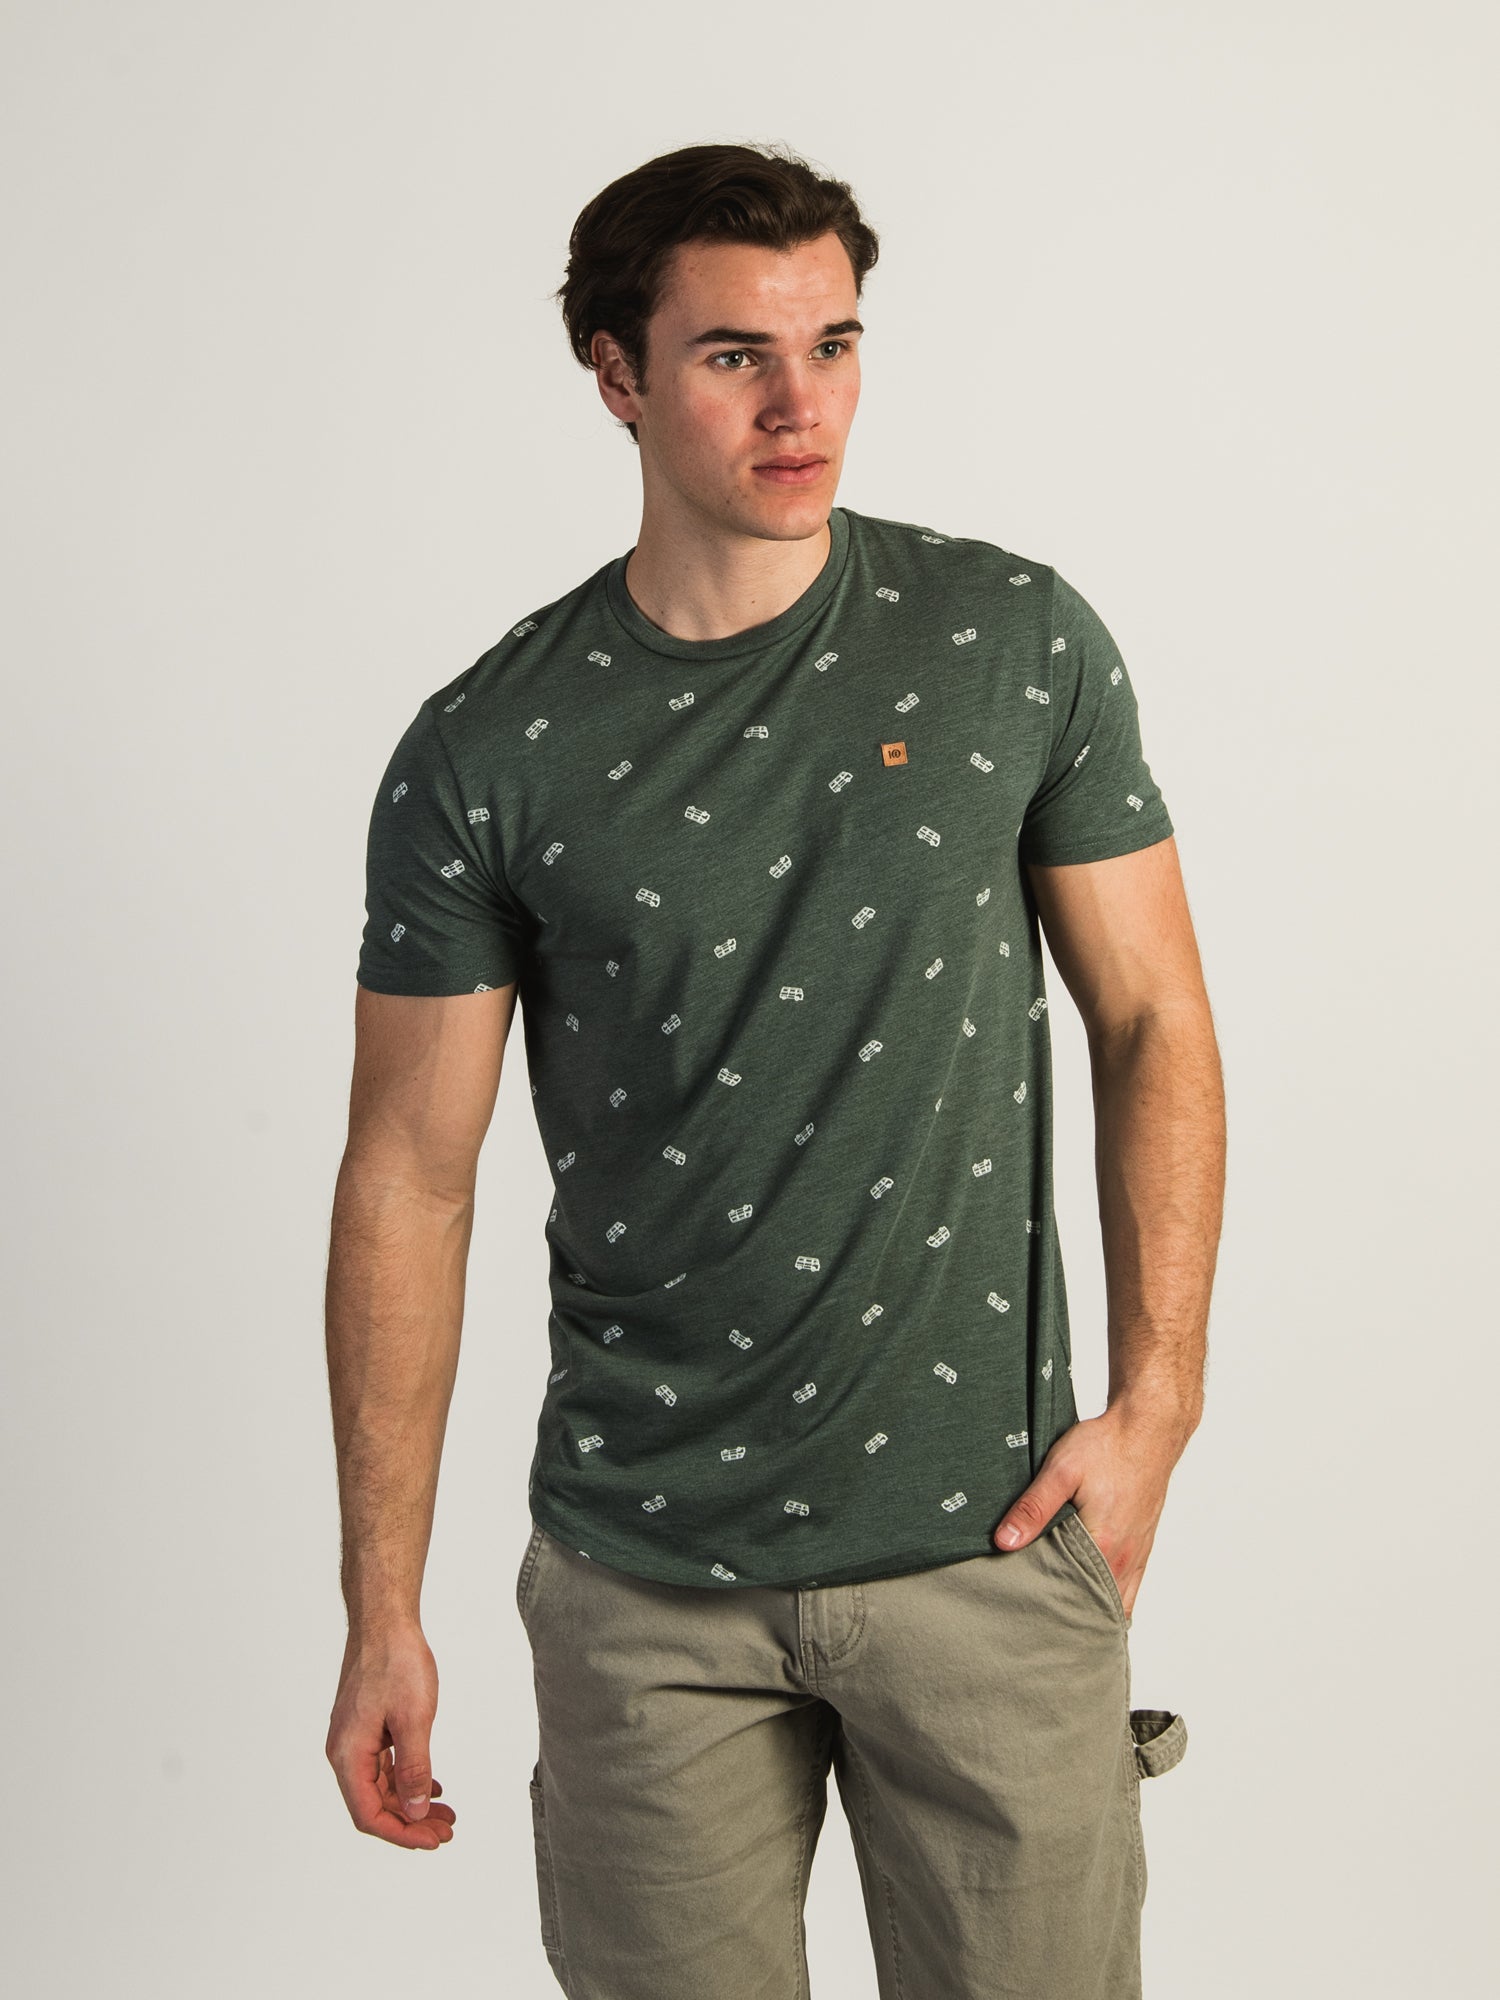 Tentree - The Best Selection in Canada - Shop Now